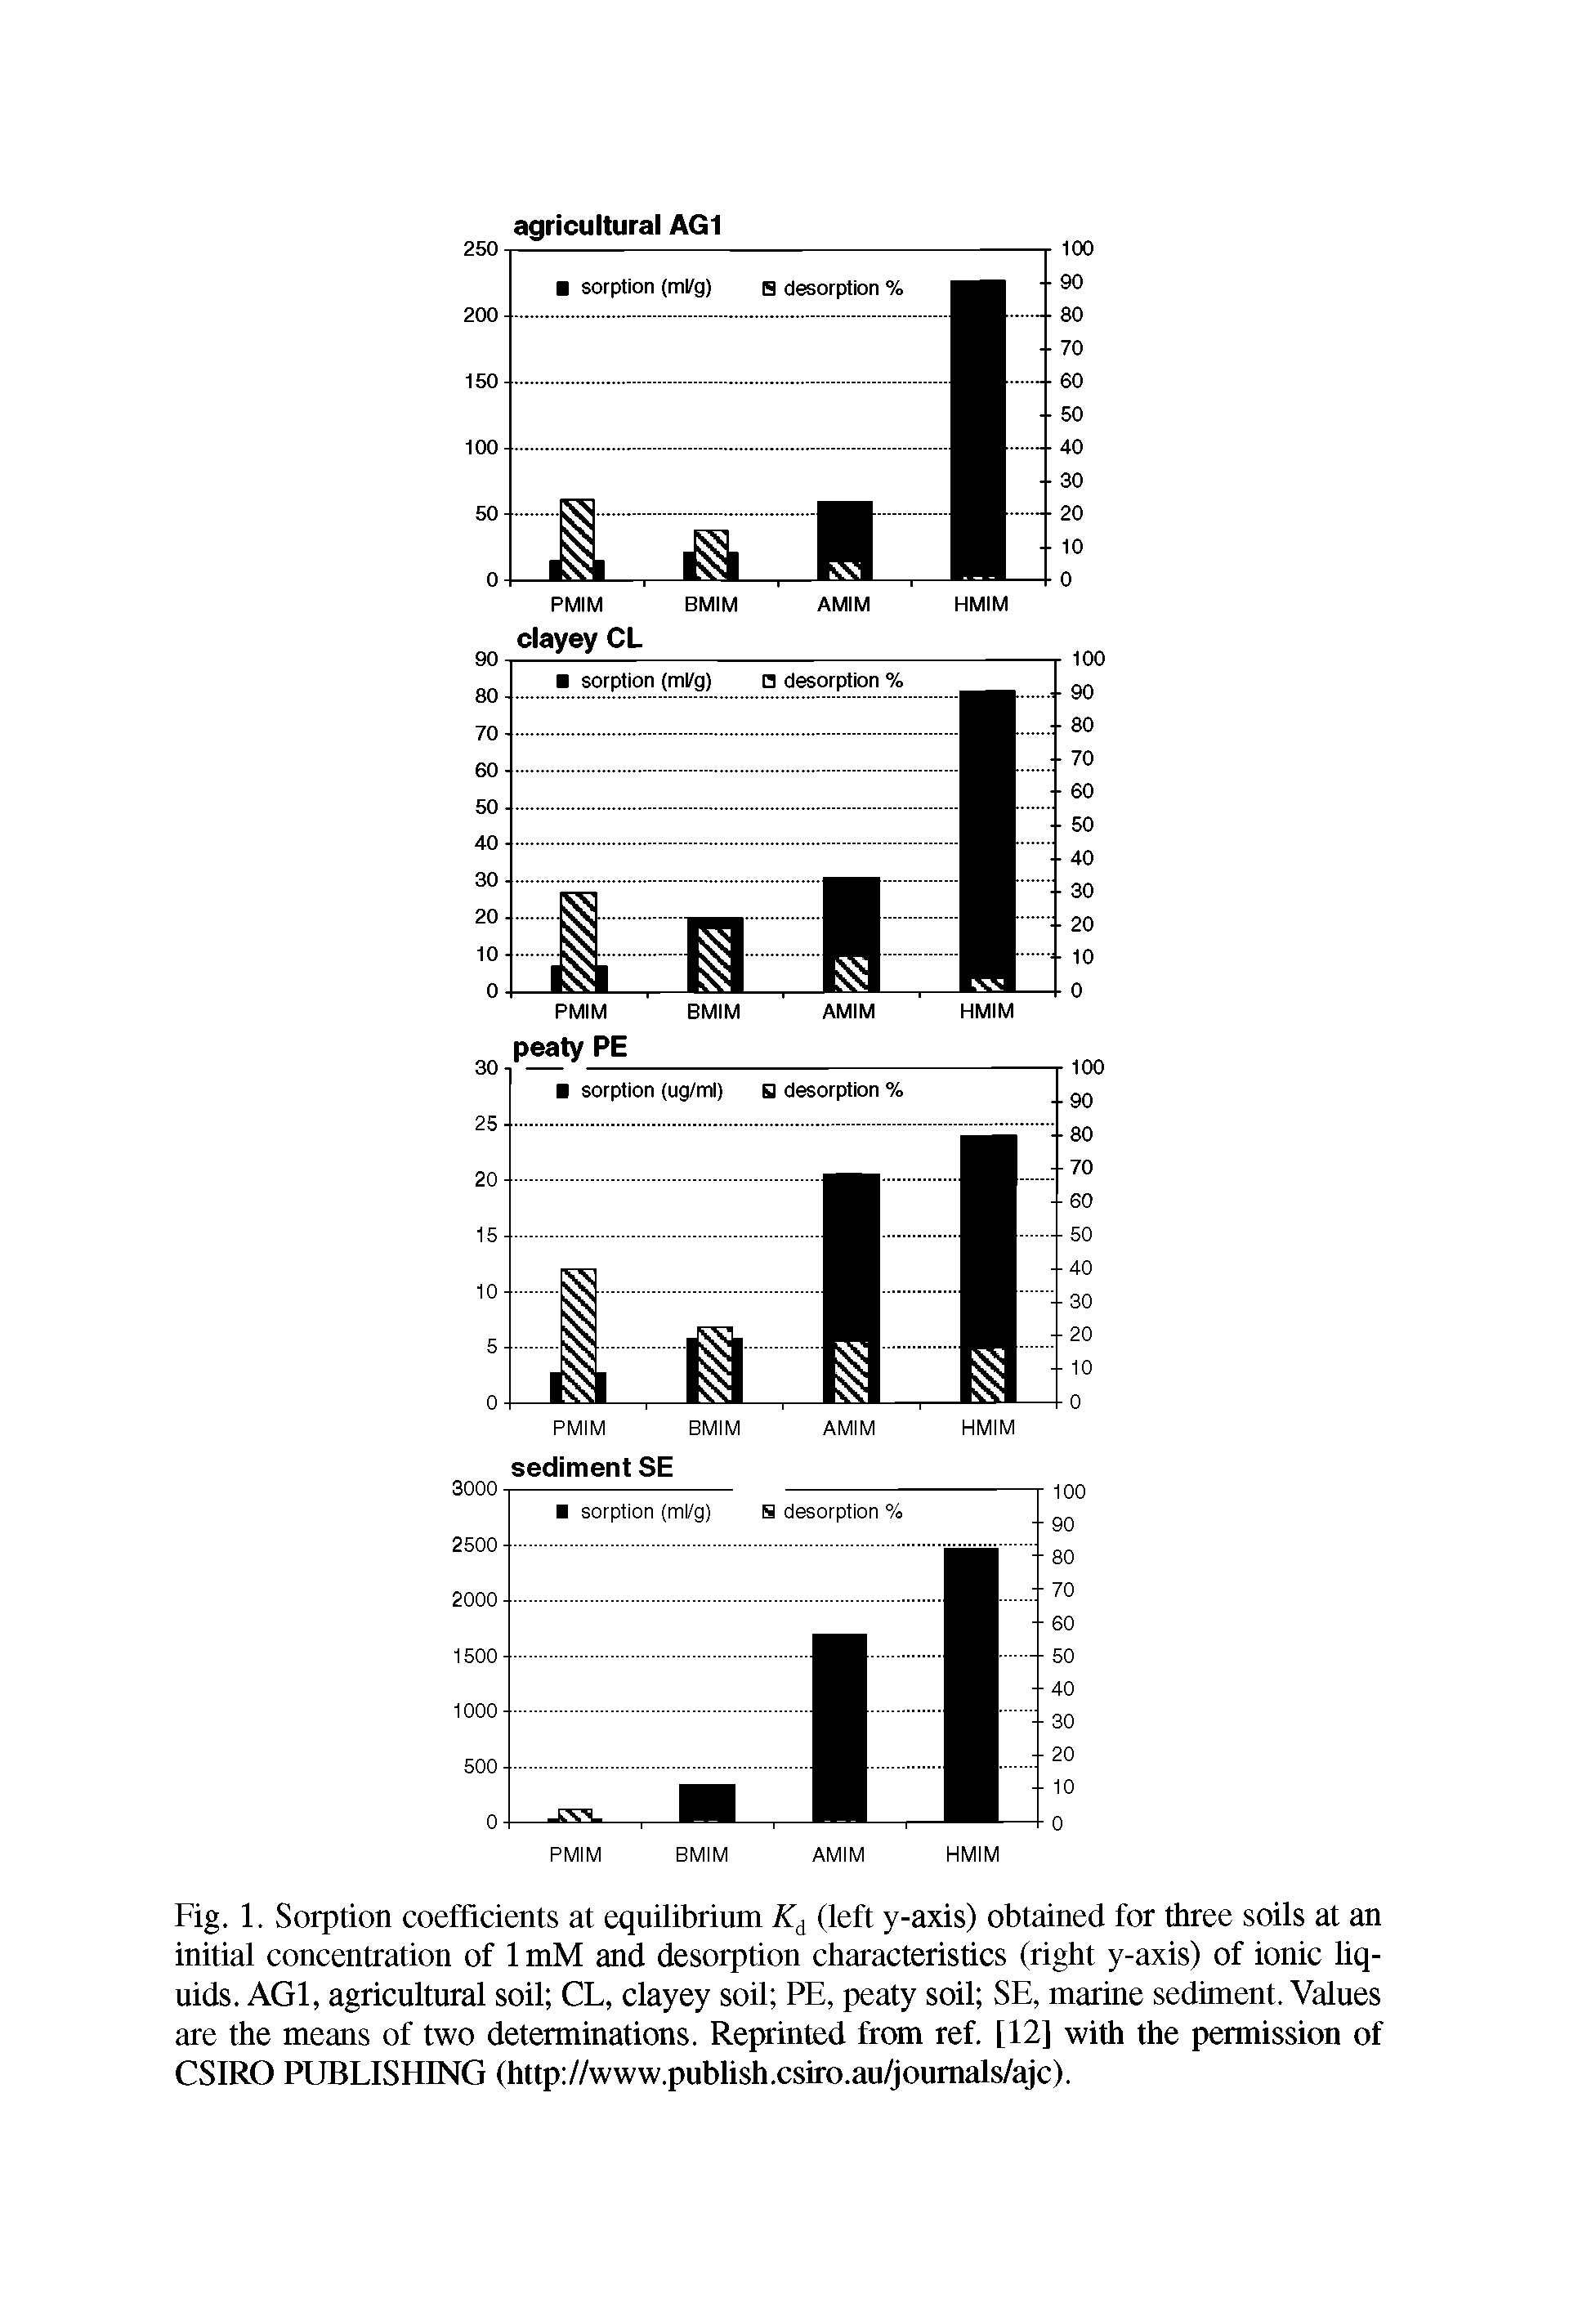 Fig. 1. Sorption coefficients at equilibrium (left y-axis) obtained for three soils at an initial concentration of 1 mM and desorption characteristics (right y-axis) of ionic liquids. AGl, agricultural soil CL, clayey soil PE, peaty soil SE, marine sediment. Values are the means of two determinations. Reprinted from ref. [12] with the permission of CSIRO PUBLISHD G (http //www.publish.csiro.au/joumals/ajc).